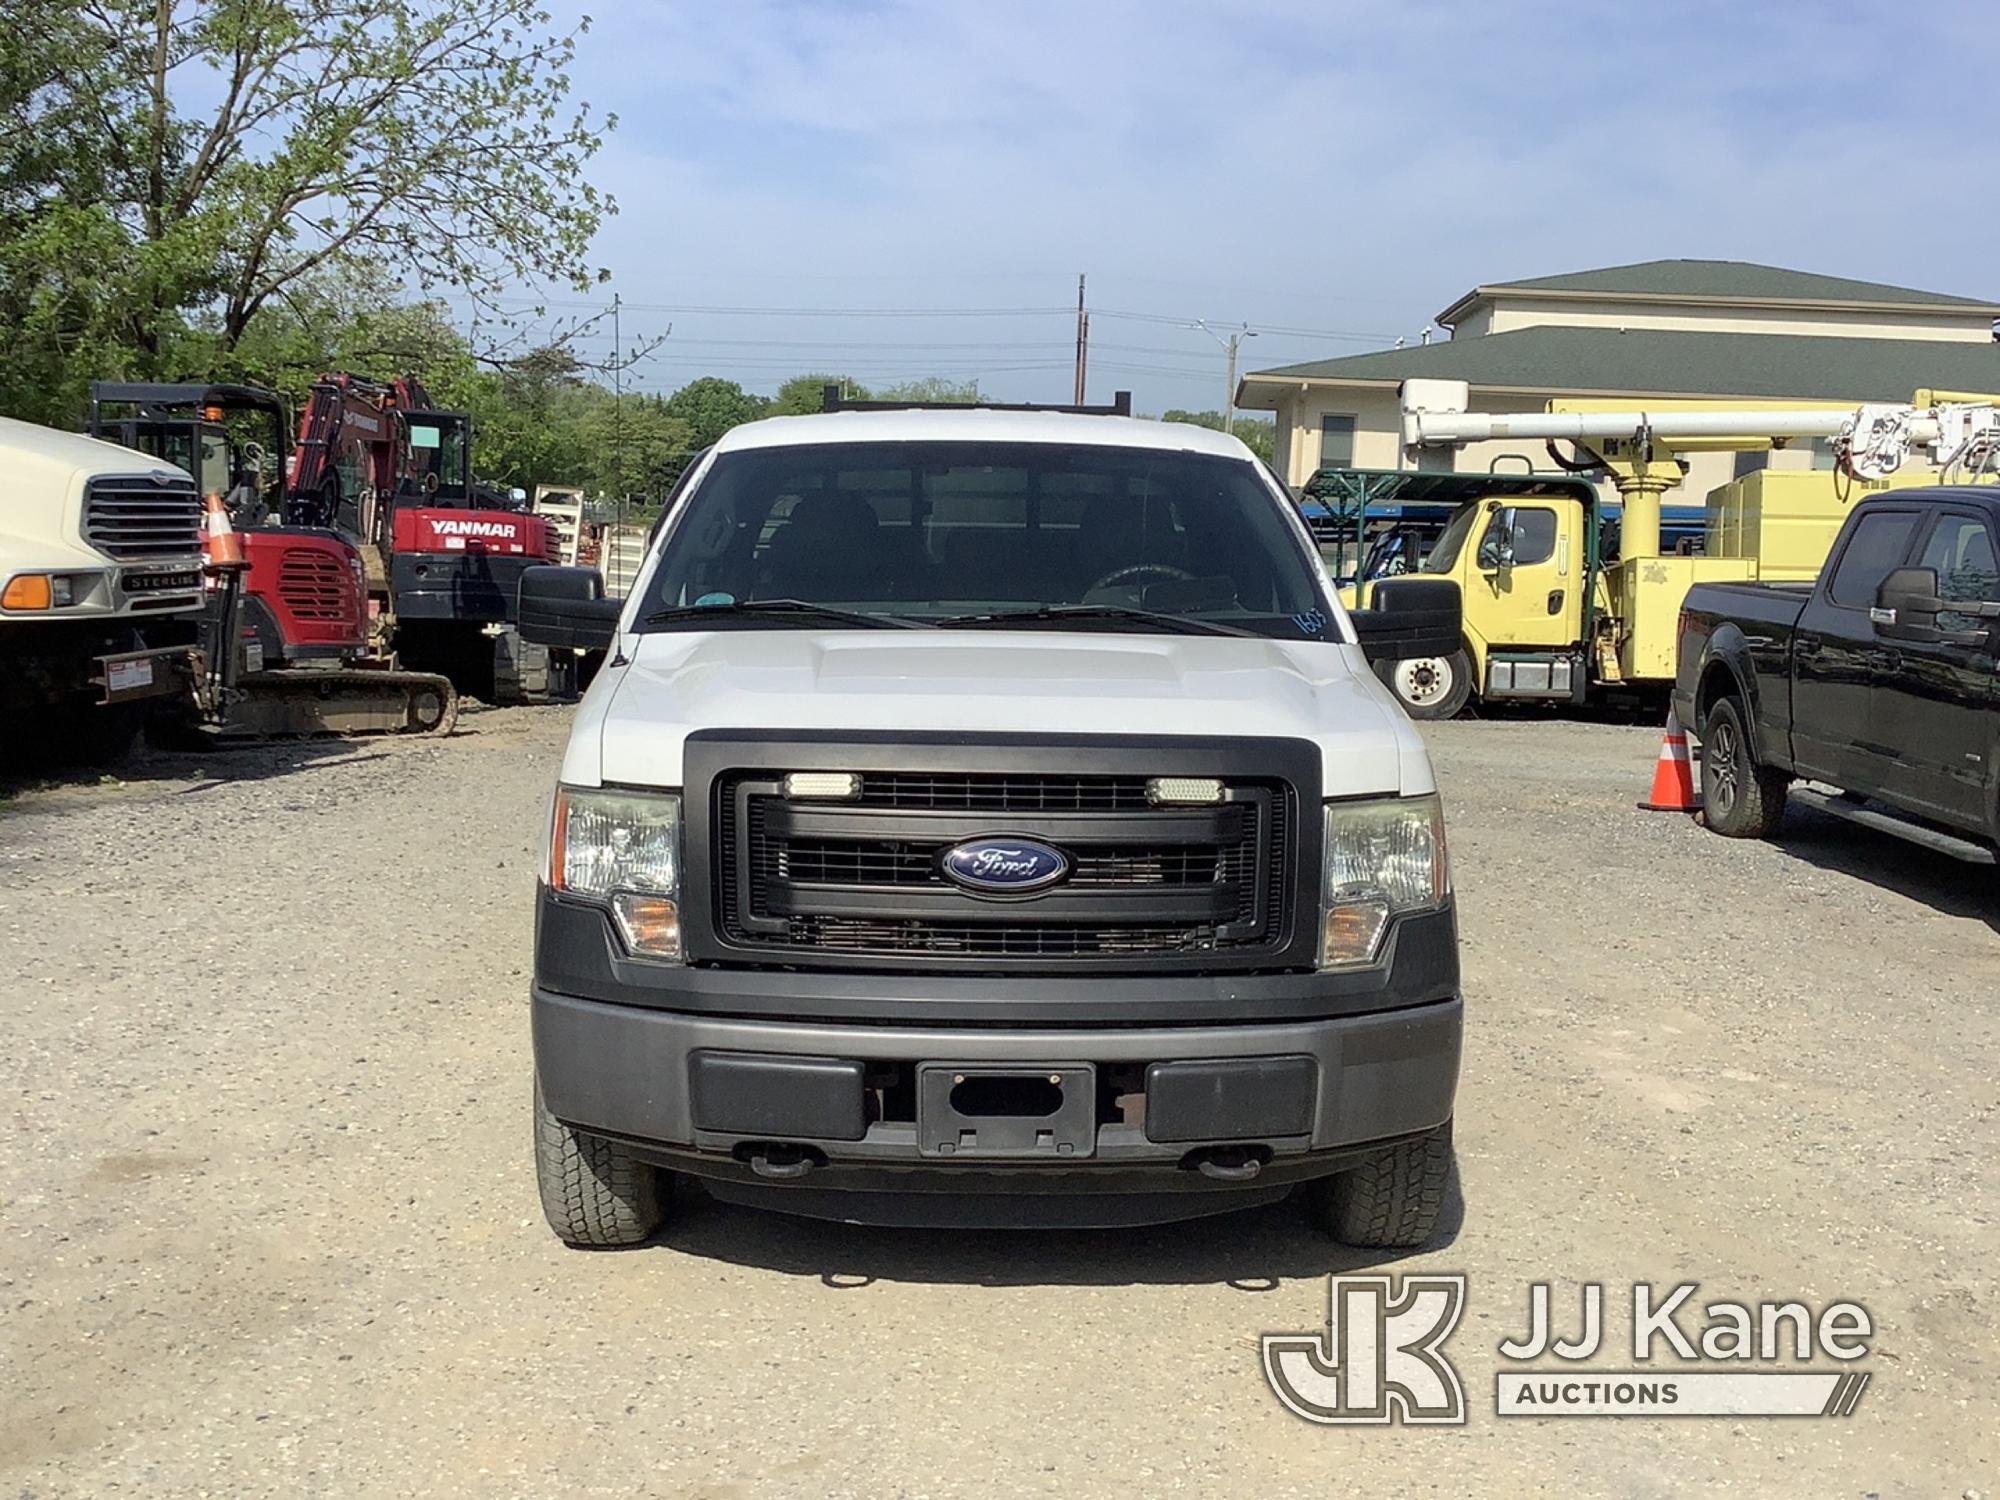 (Harmans, MD) 2013 Ford F150 4x4 Extended-Cab Pickup Truck Runs & Moves, Rust & Body Damage